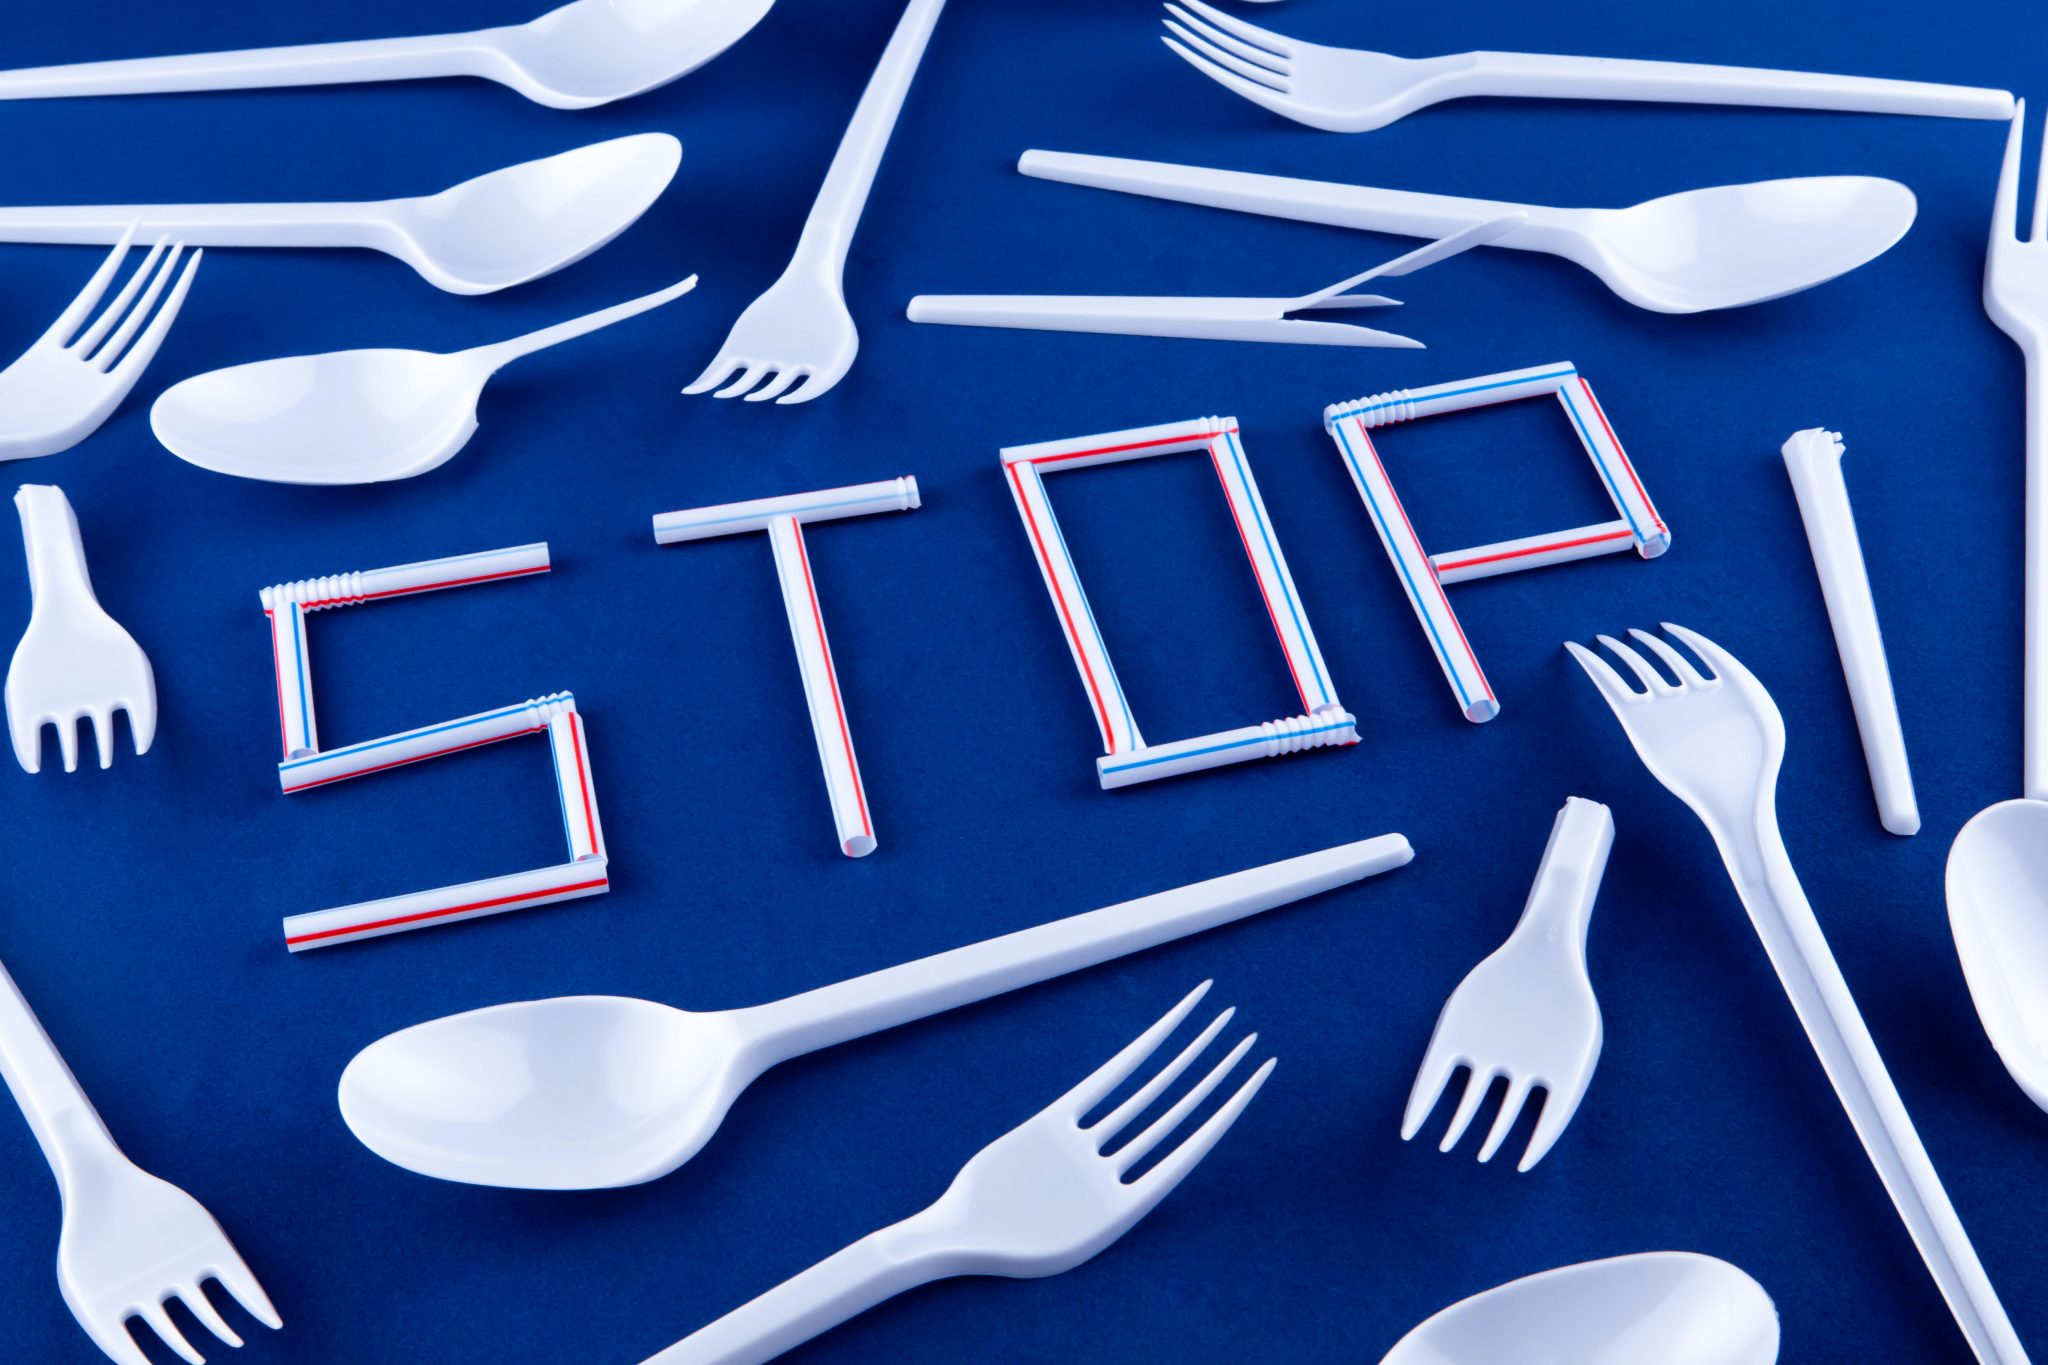 Plastic forks and spoons are scattered atop a blue surface, surrounding plastic straws that spell out the word "stop"